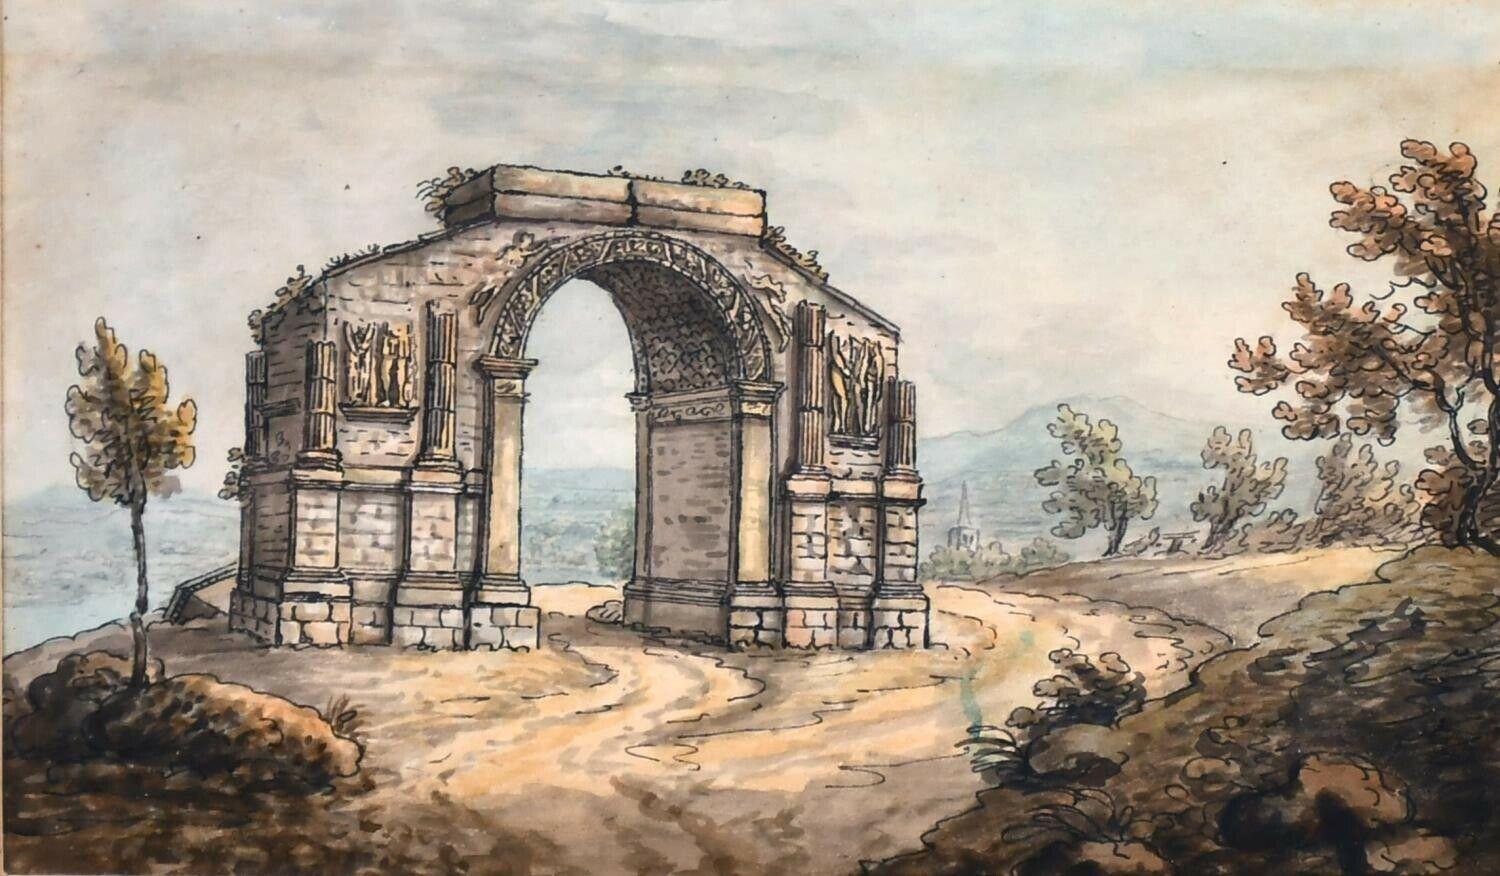 French artist Landscape Painting - 18th CENTURY FRENCH GRAND TOUR WATERCOLOUR - ROMAN MONUMENT ST. REMY PROVENCE